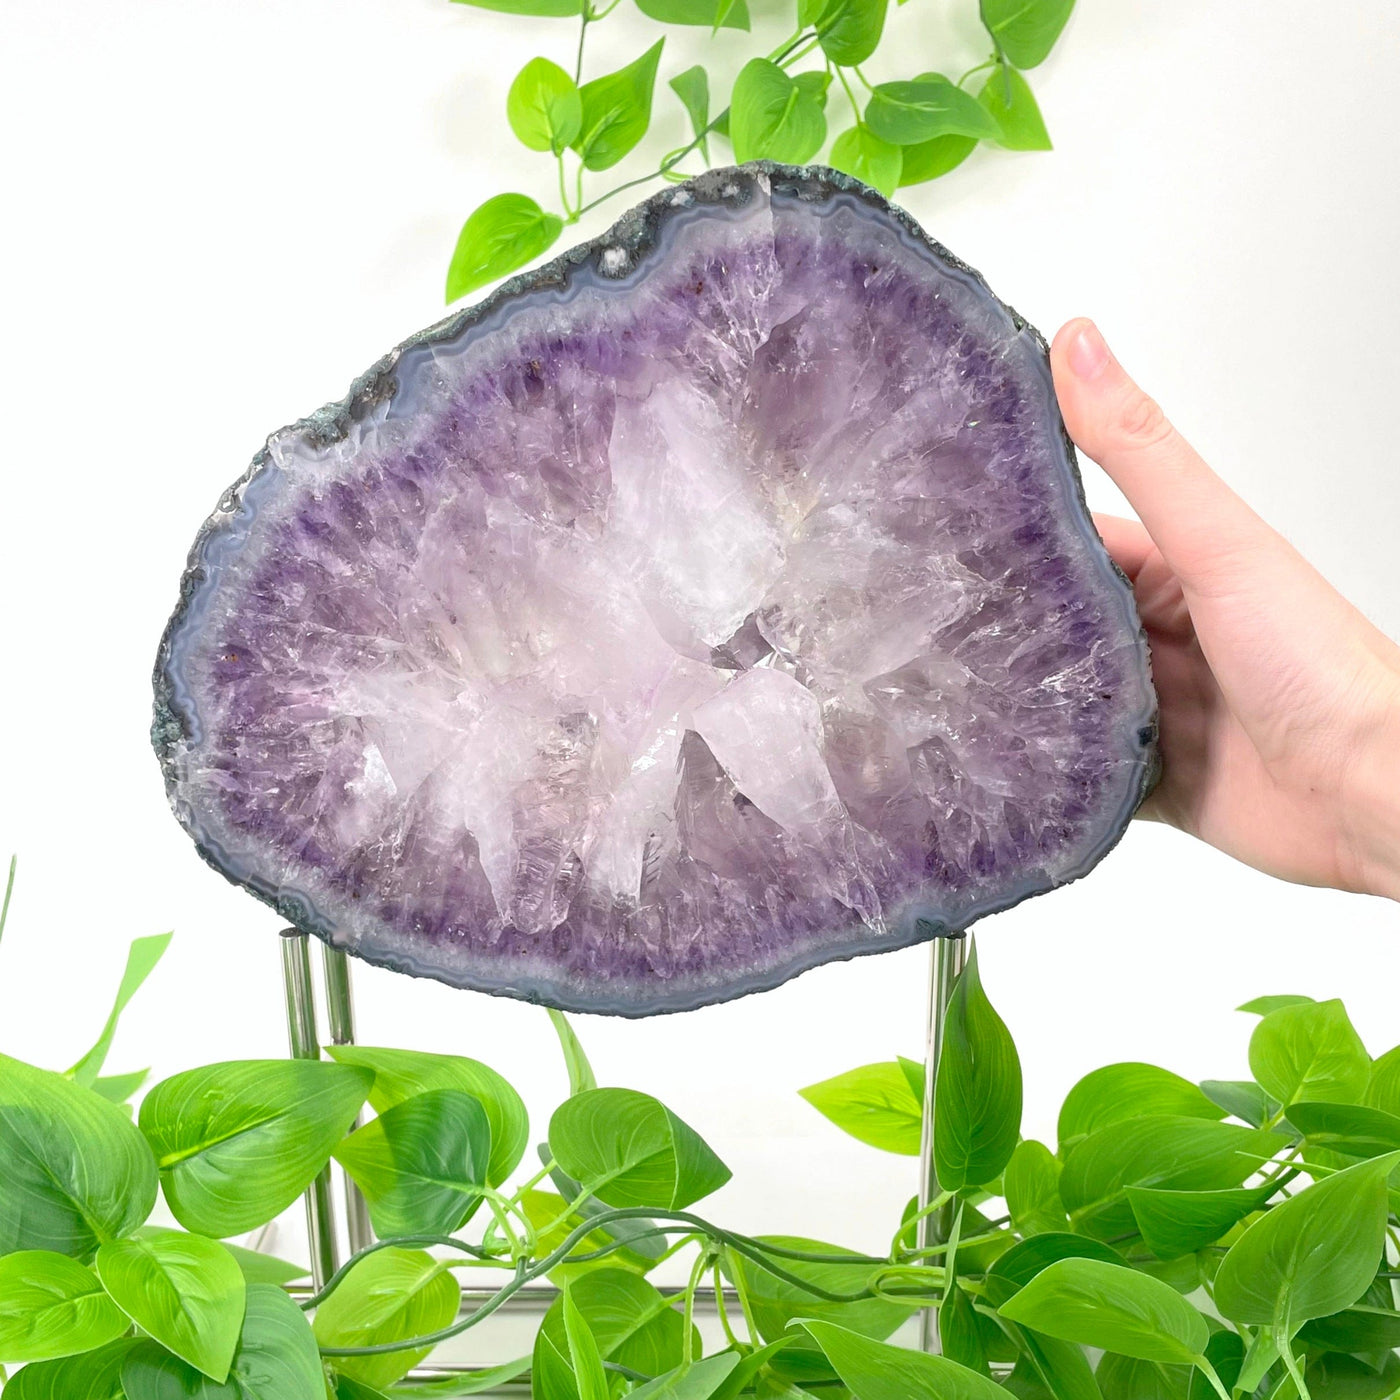 large amethyst slab on stand with hand for size reference